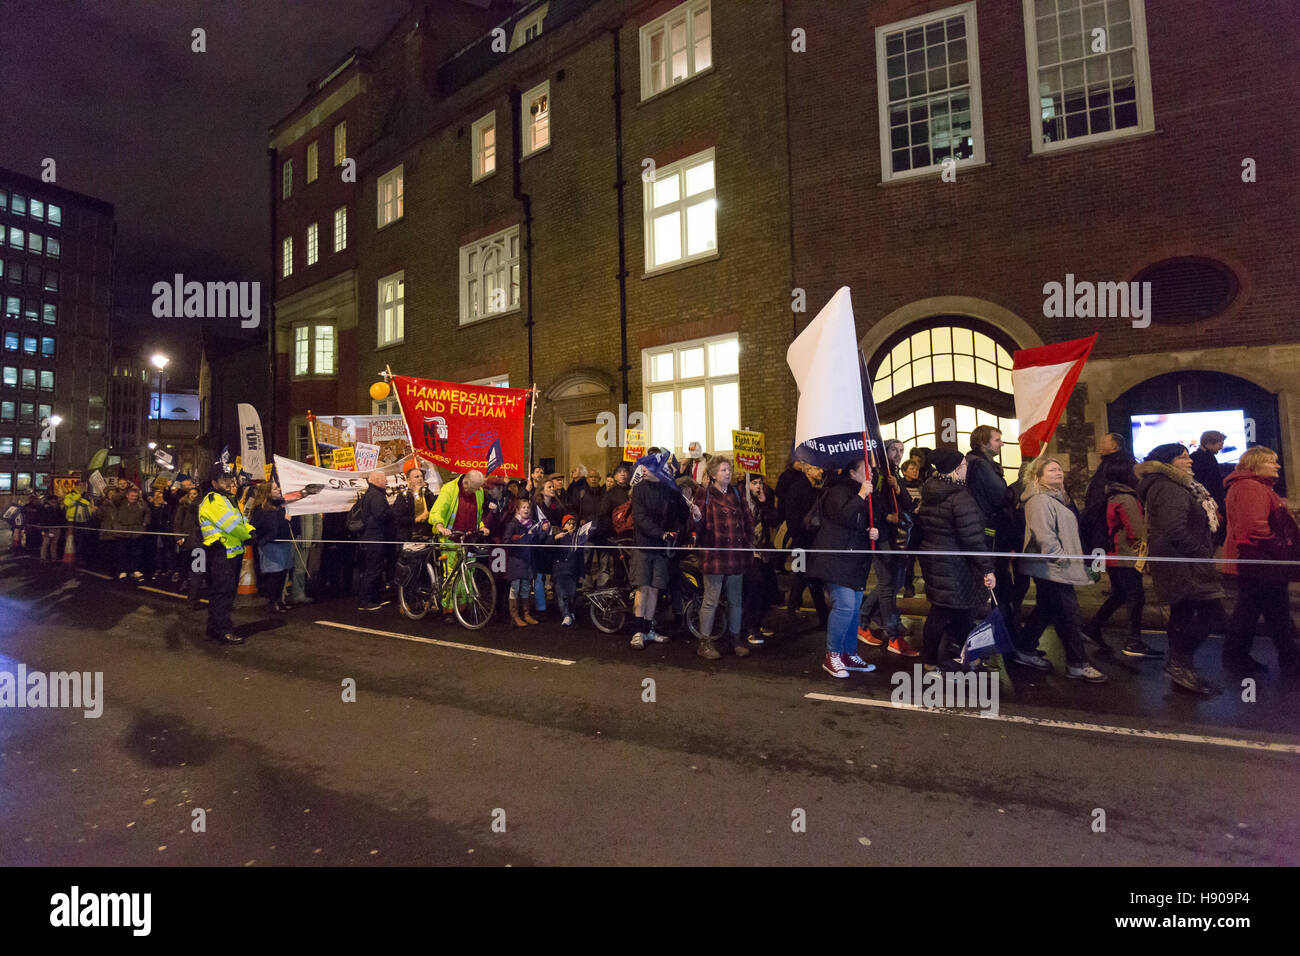 London, UK. 17th Nov 2016. Protesters march past the Department for Education. Teachers from the National Union of Teachers (NUT), school governors and support staff stage a protest rally against government cuts in education funding outside Downing Street in Westminster before marching to the Department for Education this evening. Protesters are demanding and increase in education funding in the upcoming budget to ensure that every child gets the best education. Credit:  Vickie Flores/Alamy Live News Stock Photo